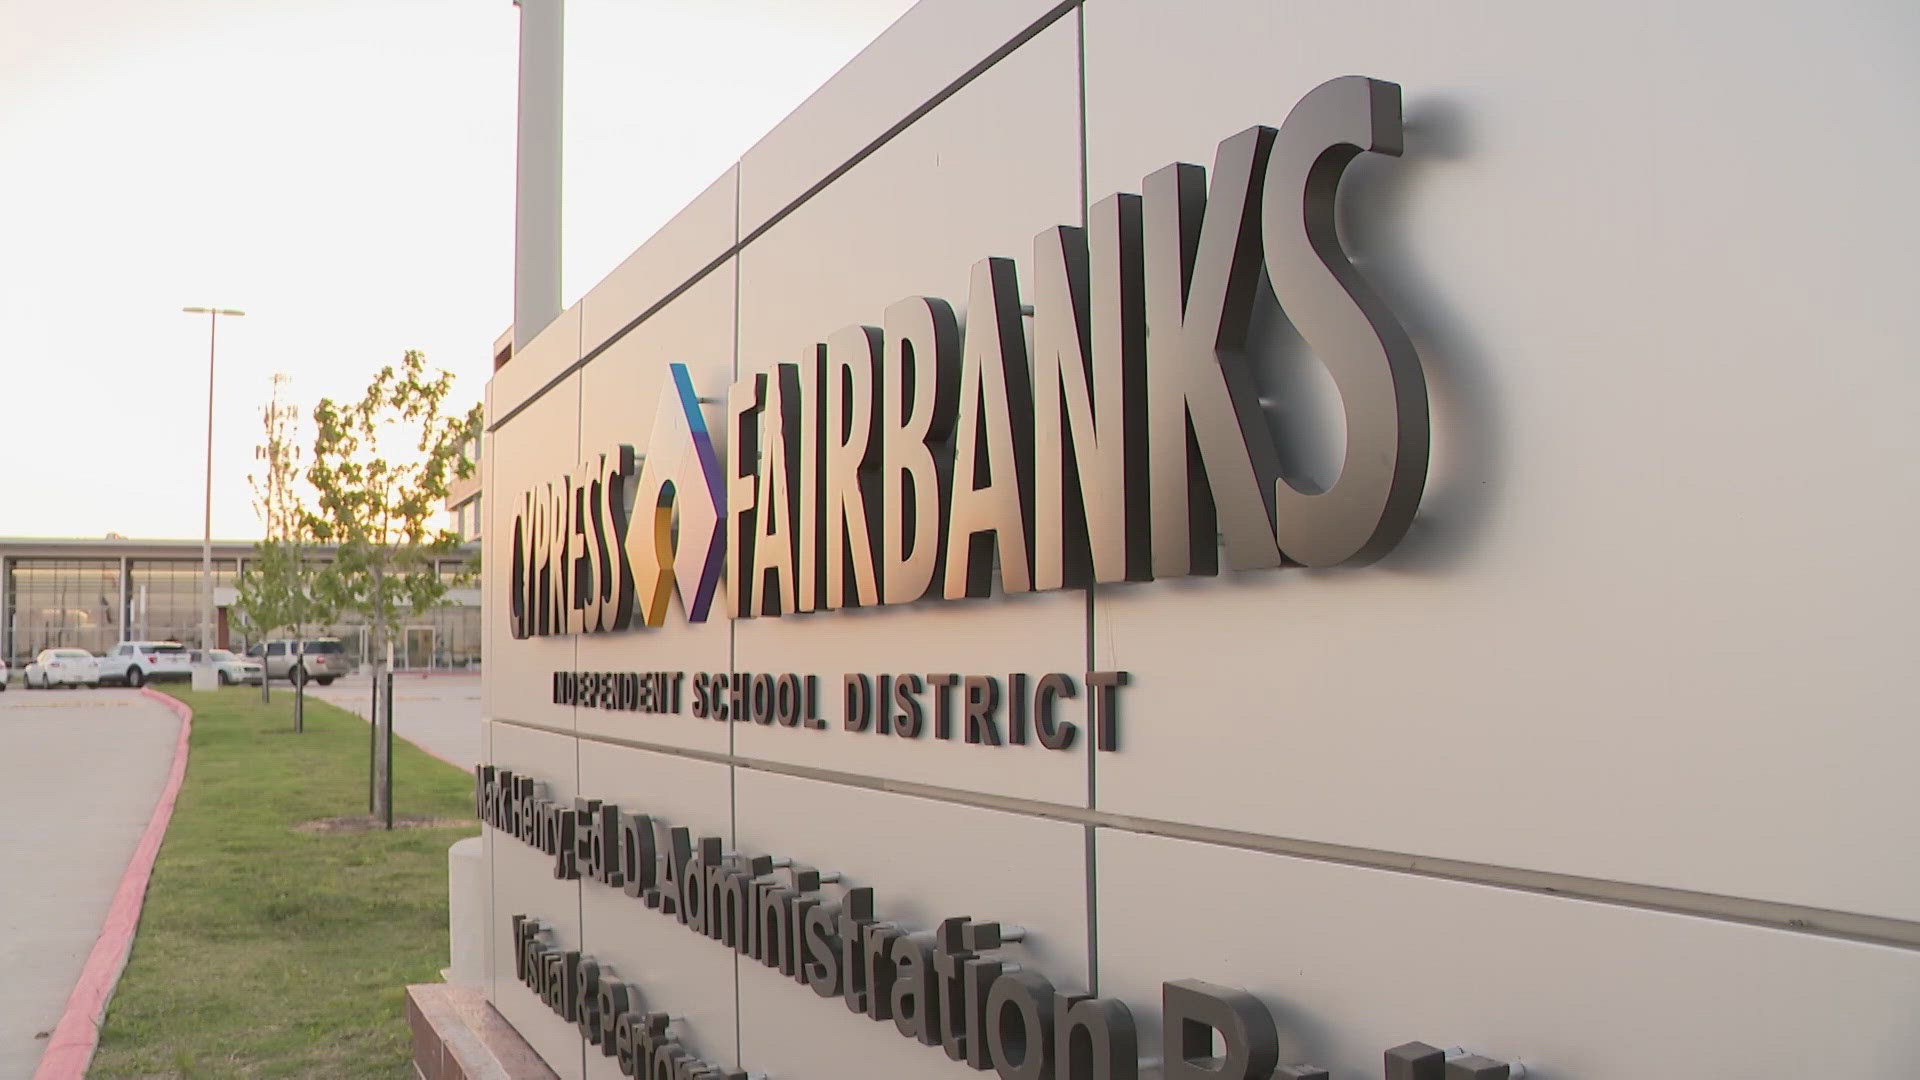 Cypress Fairbanks ISD has a budget problem. District leaders held a special meeting Monday night to figure out how to close a $68 million budget shortfall.